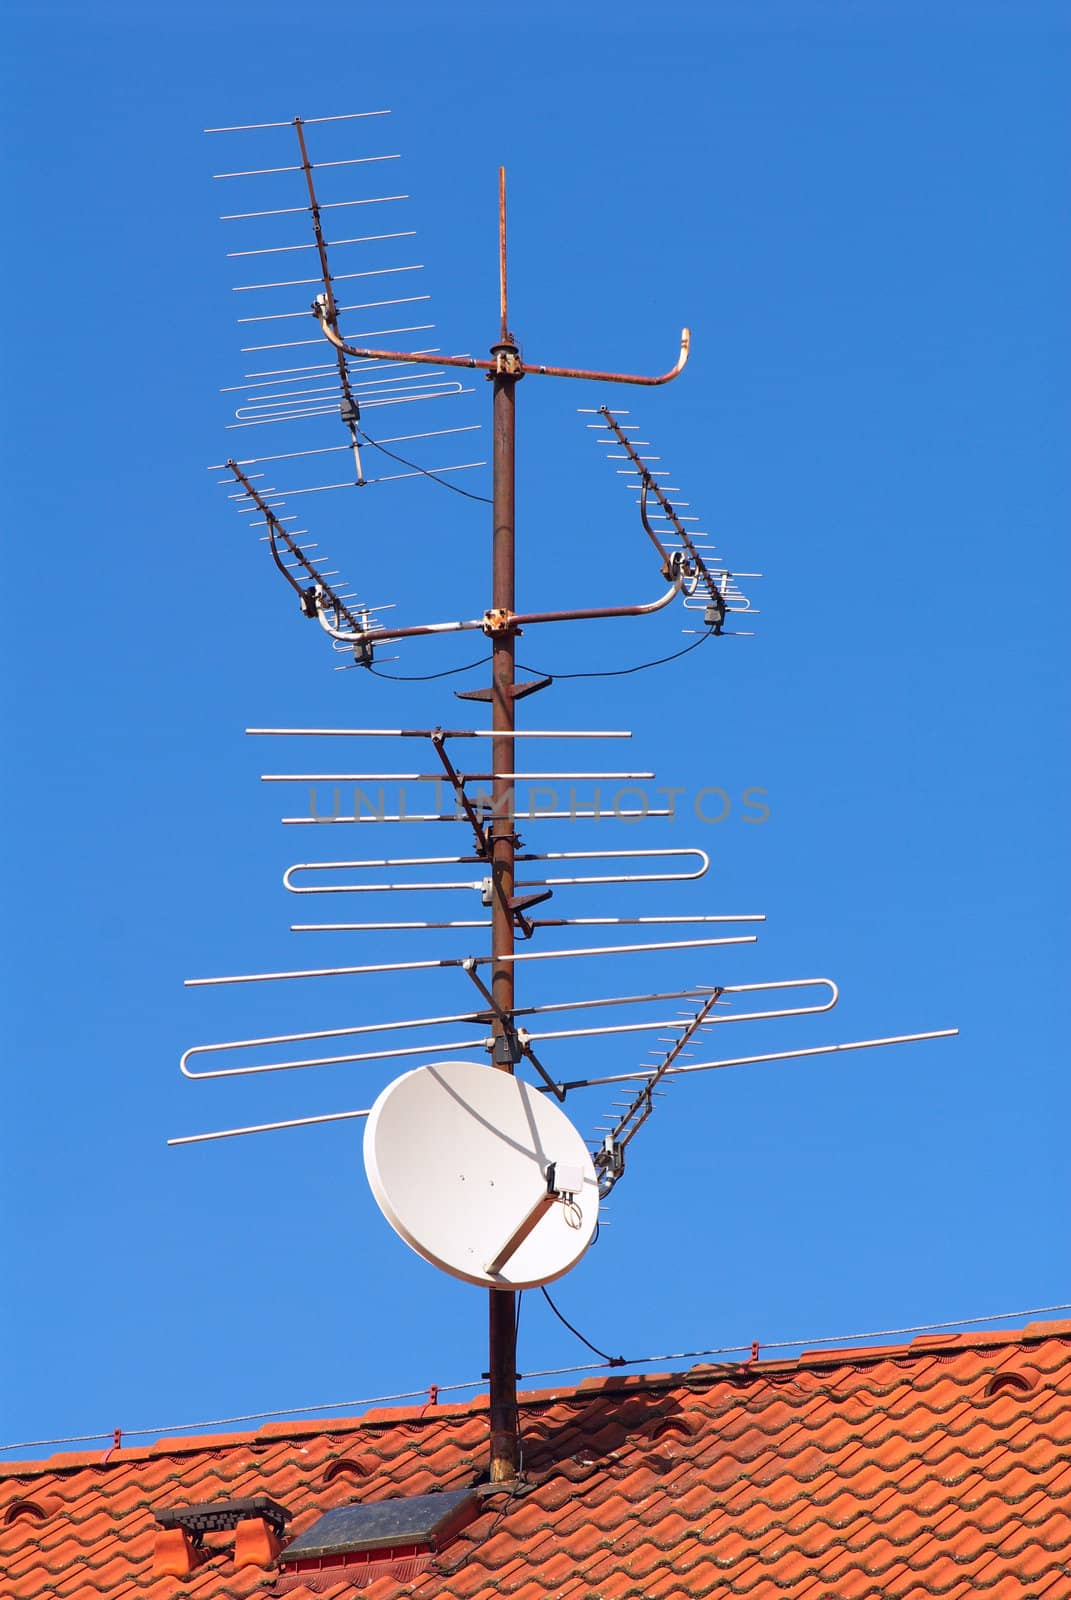 Photo of a roof of the suburban house with the attached aerials of communication